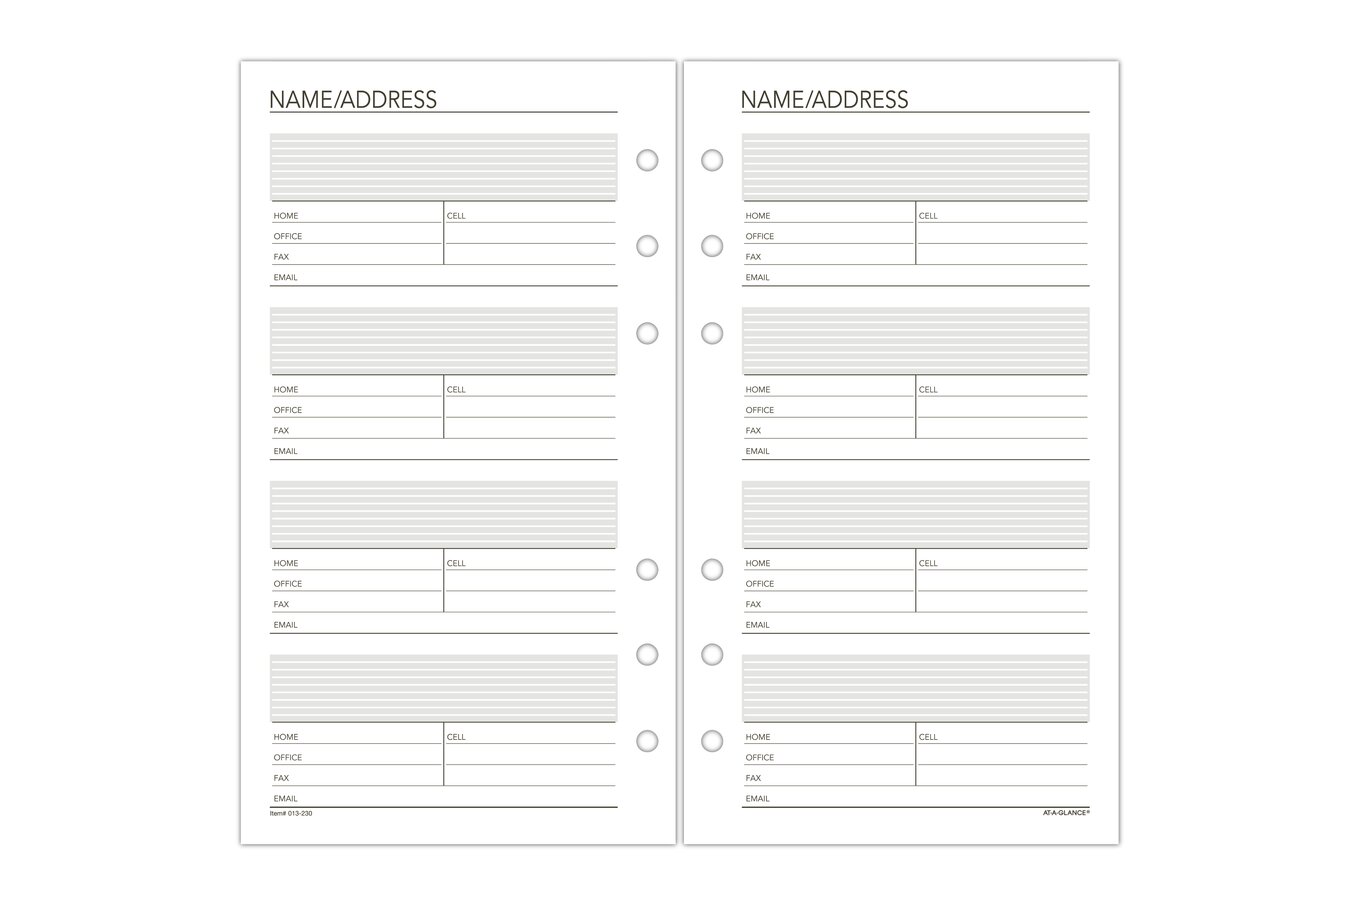 Address Books & Personal Planners